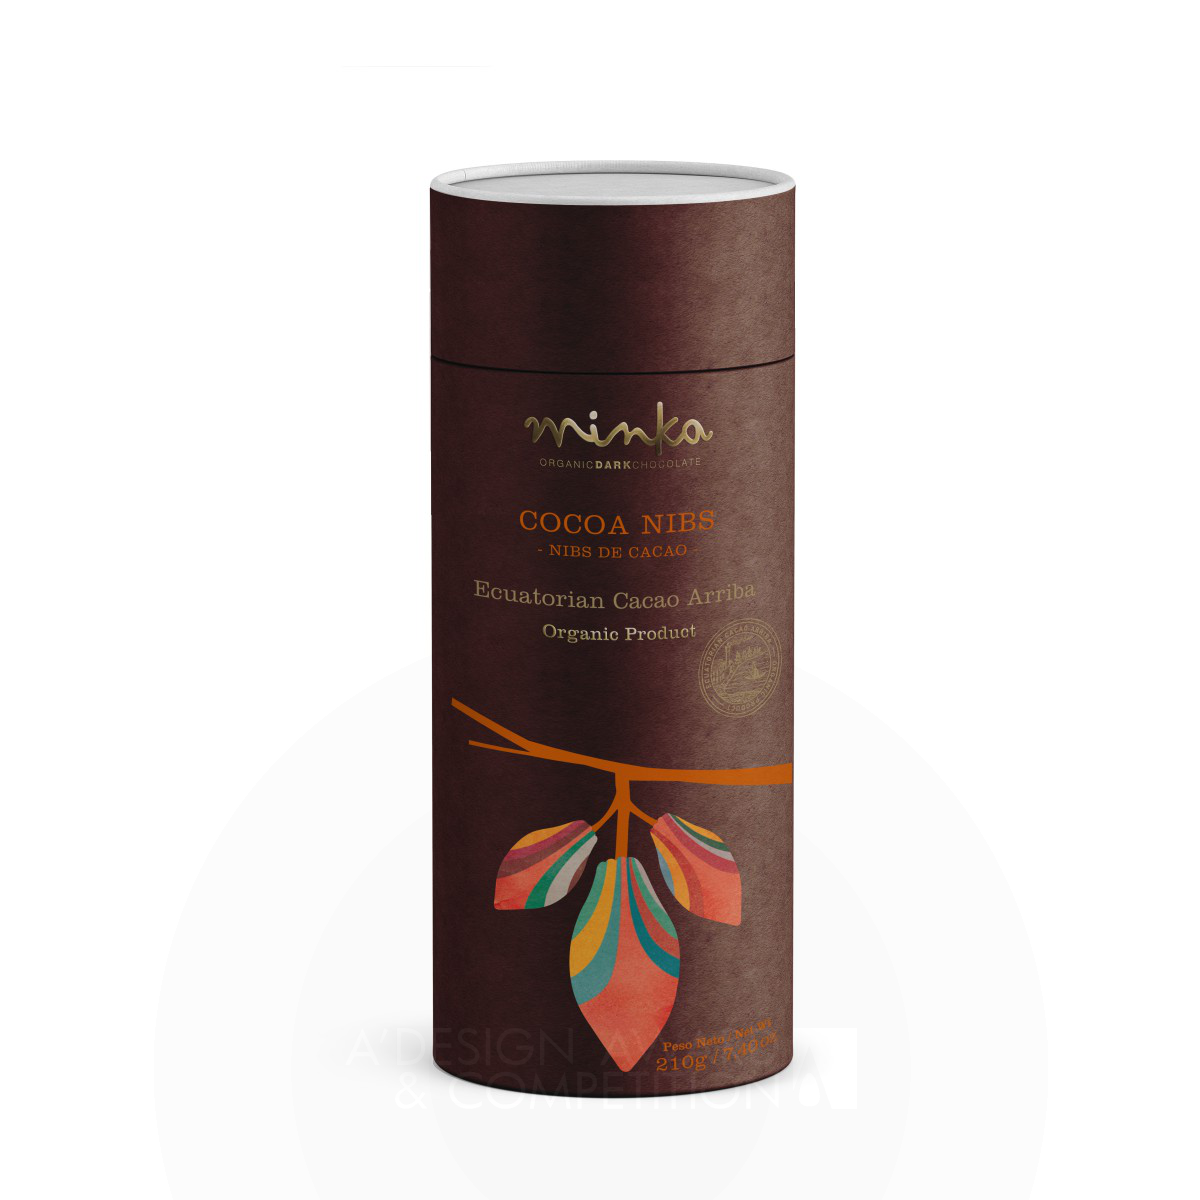 Minka Chocolate Packaging by Guillermo Dufranc